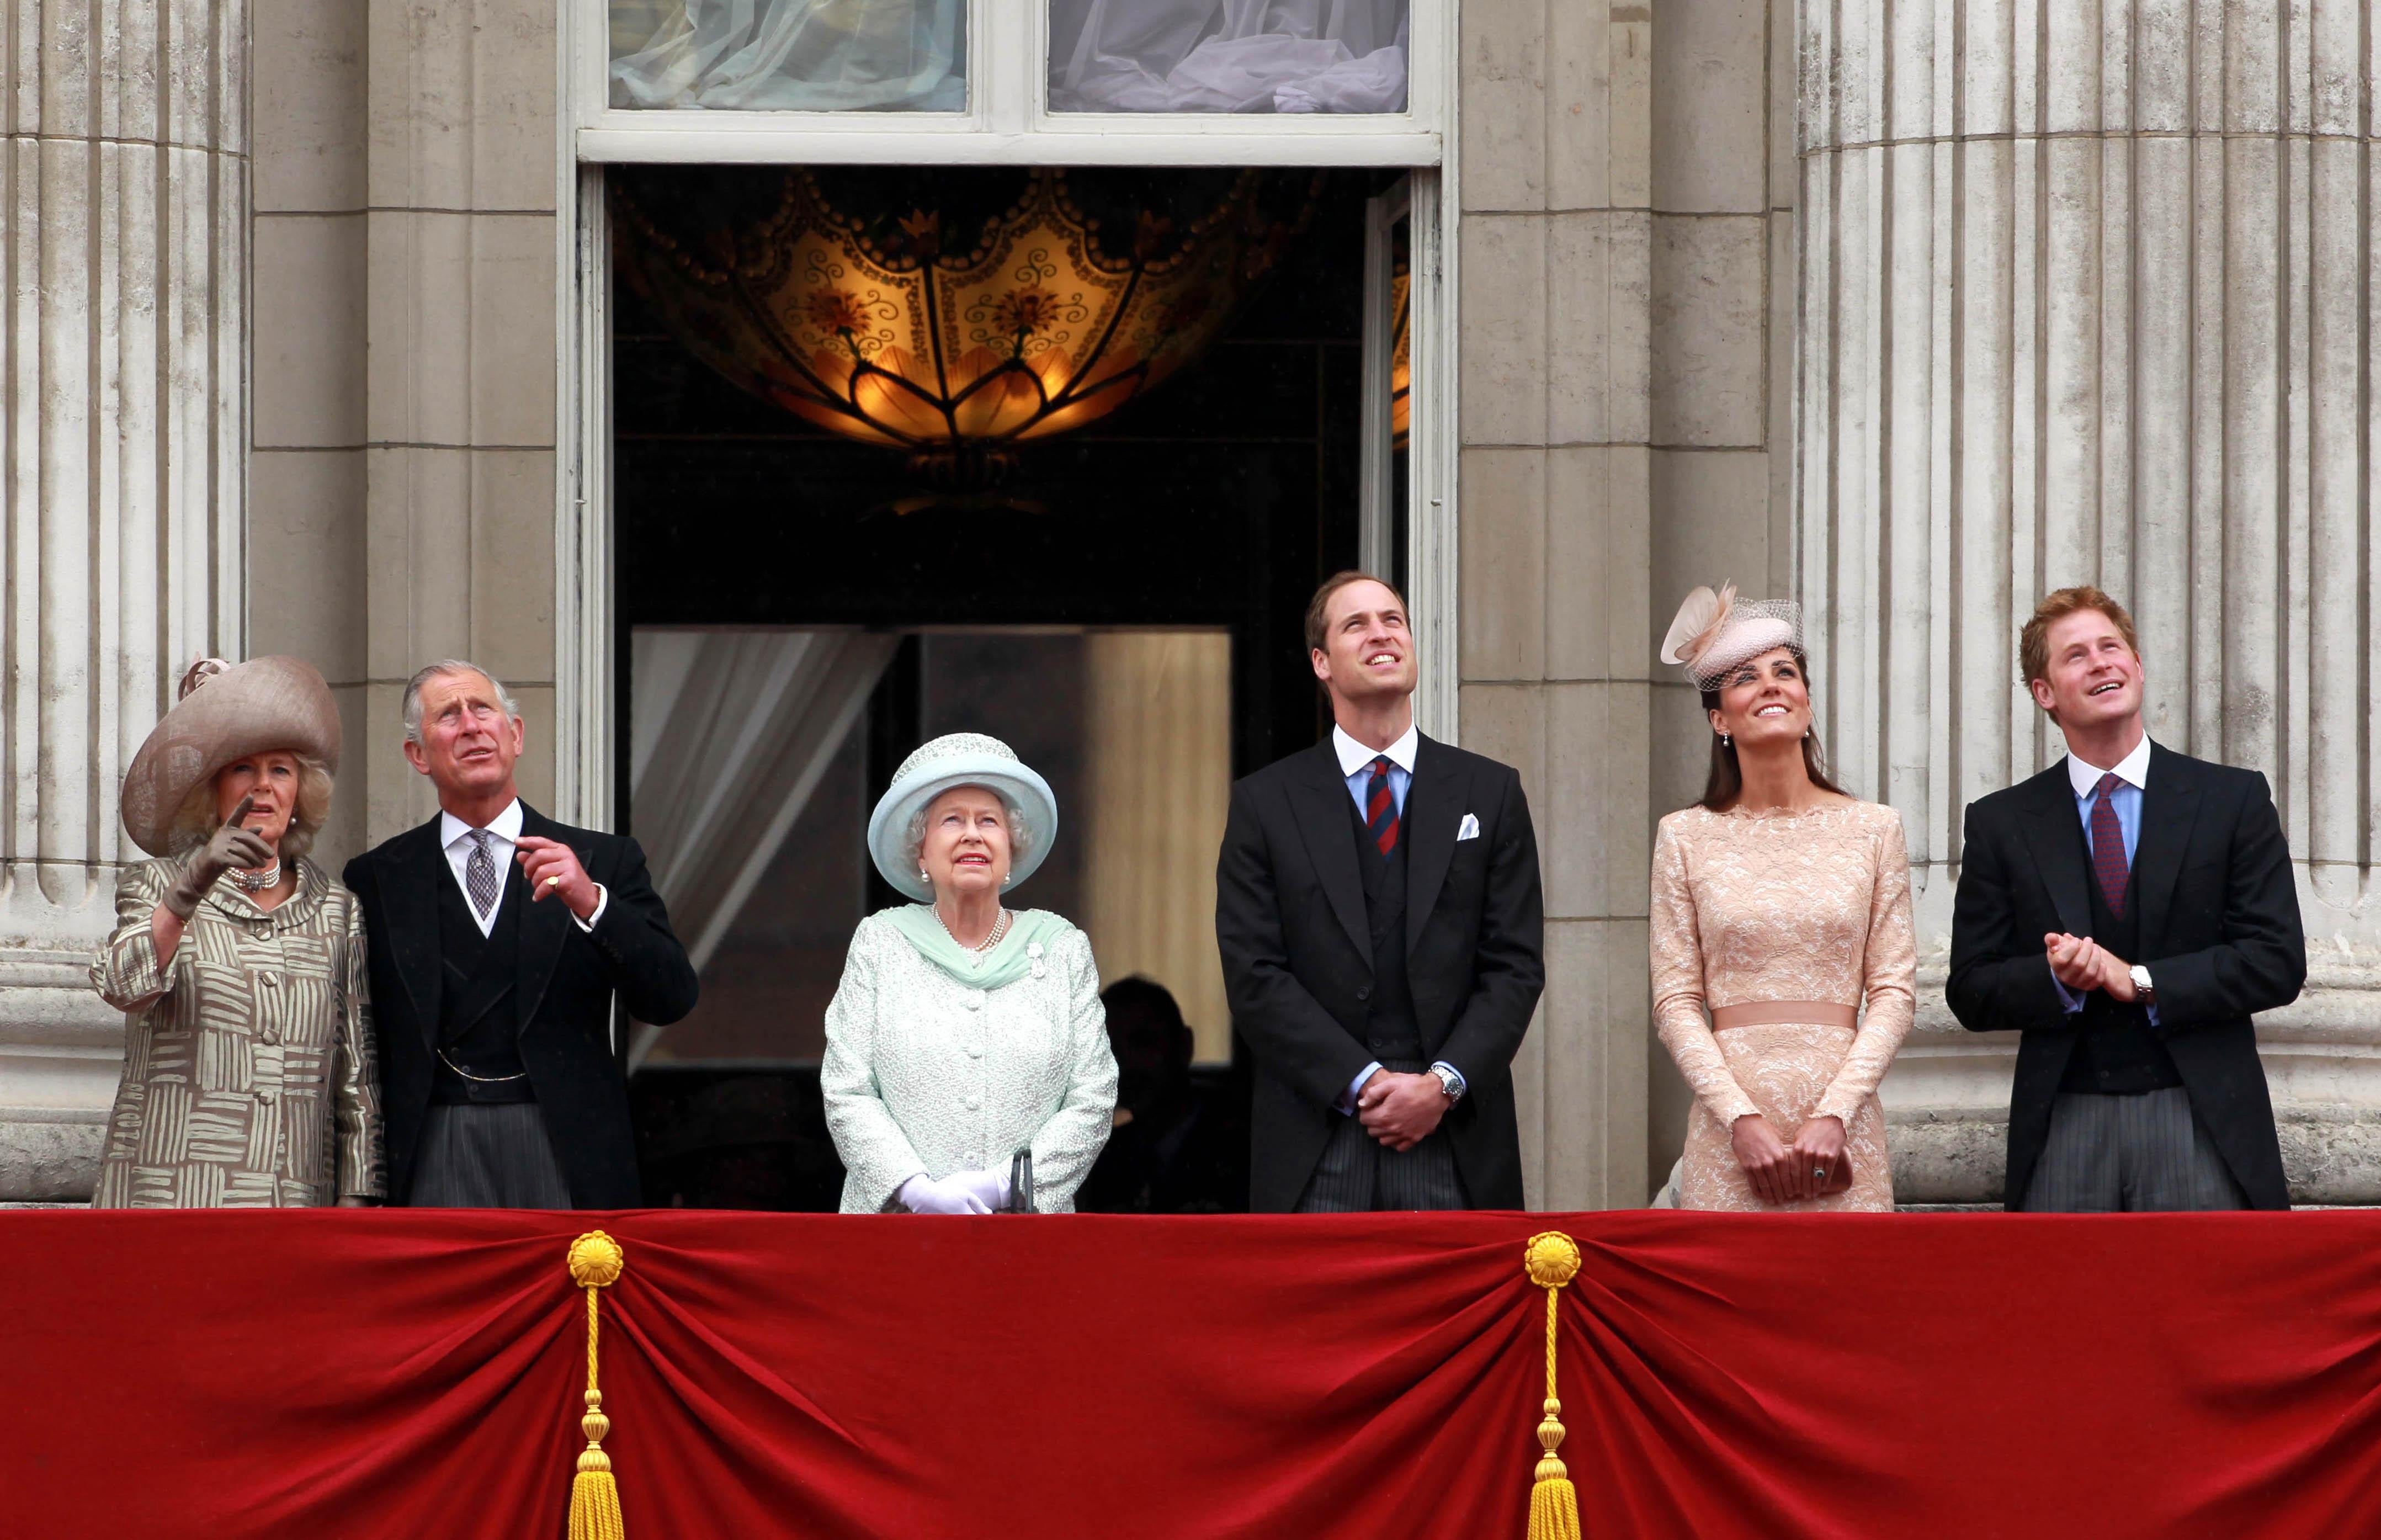 The Duchess of Cornwall, the Prince of Wales, the Queen, the Duke and Duchess of Cambridge and Prince Harry appear on the balcony of Buckingham Palace to watch the flypast during the Diamond Jubilee celebrations (David Davies/PA)